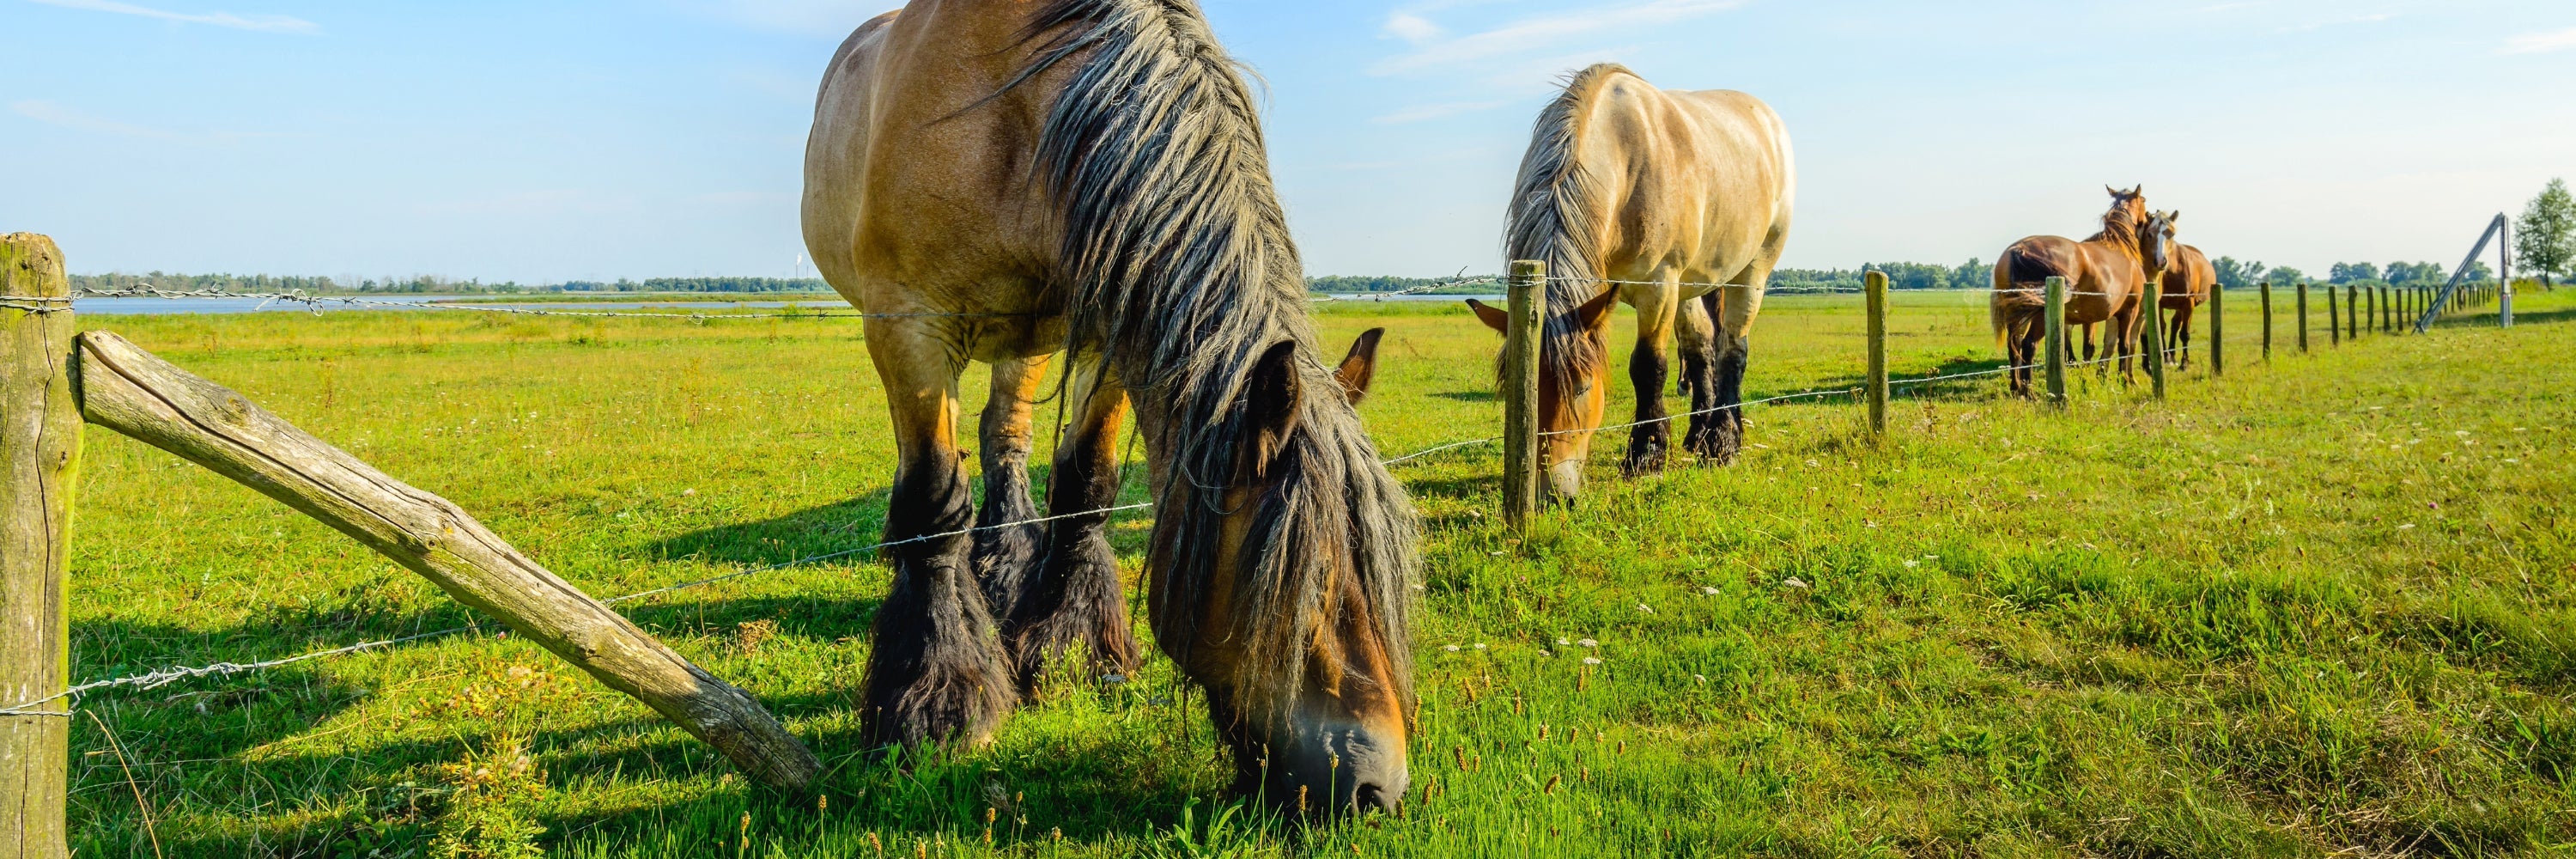 All Horse Products & Equine Supplements, Horse Care Products, Natural Horse Supplements. Horses grazing on green grass